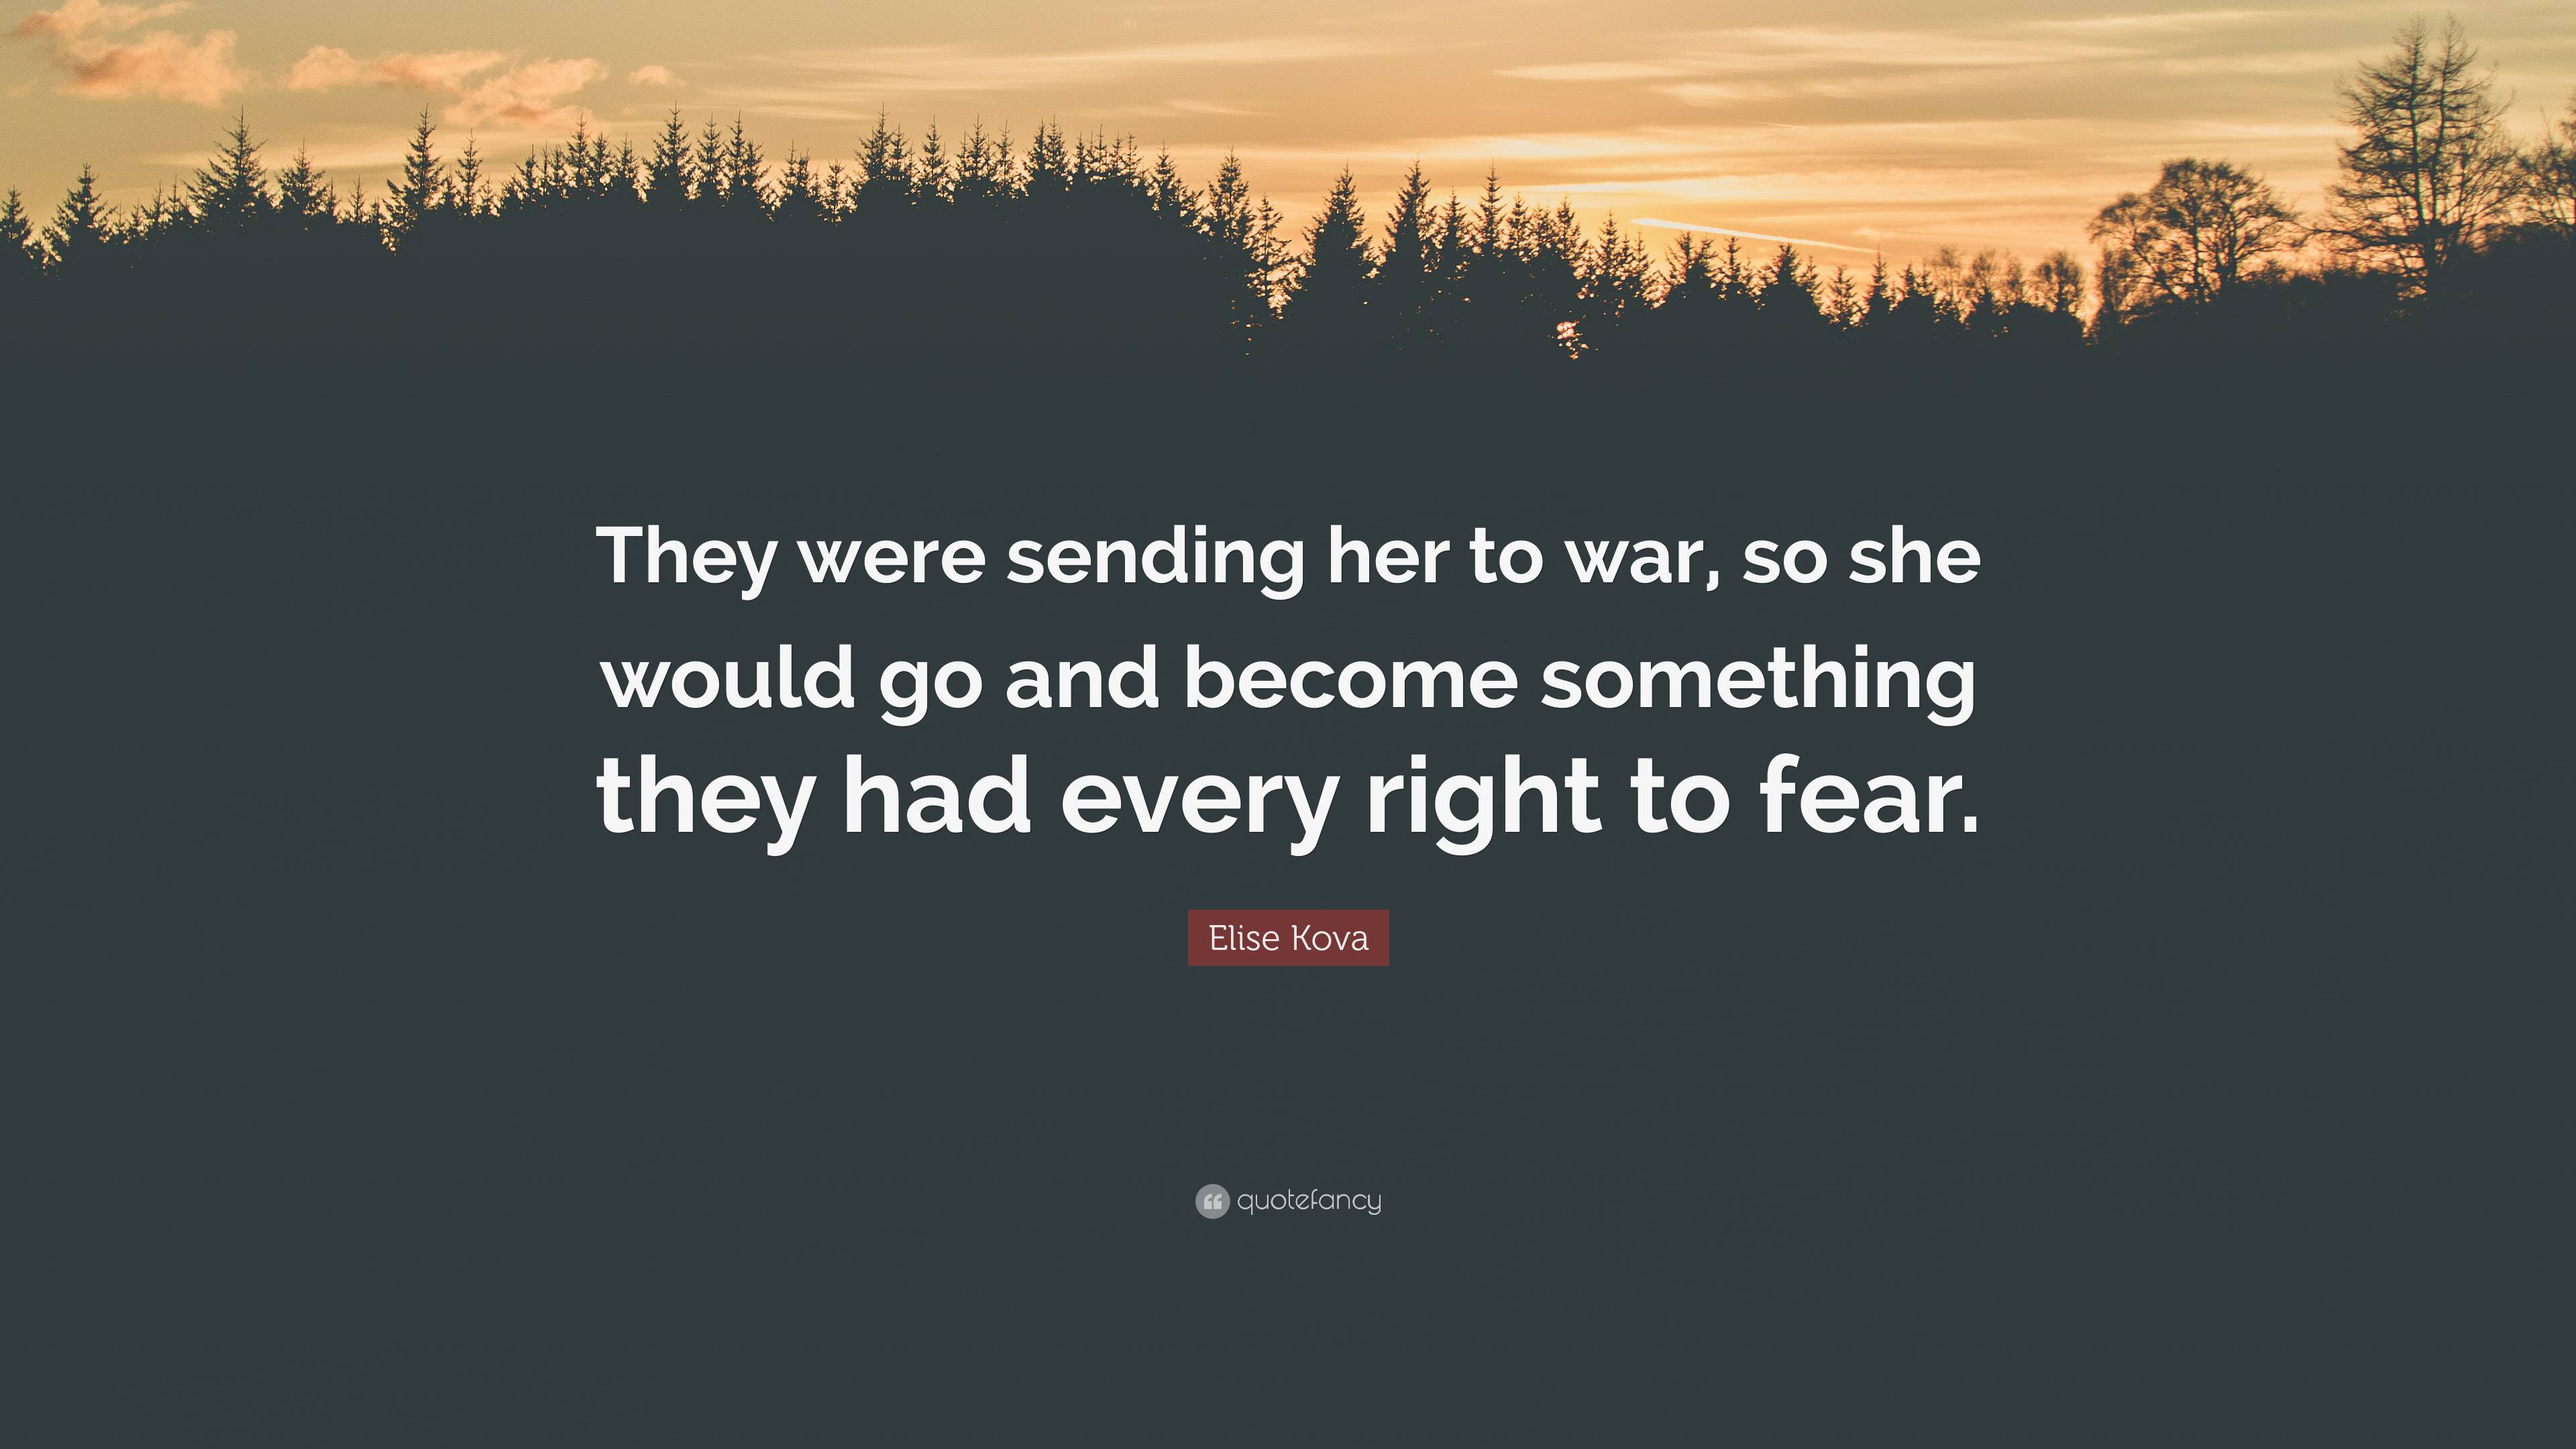 Elise Kova Quote: “They were sending her to war, so she would go and ...